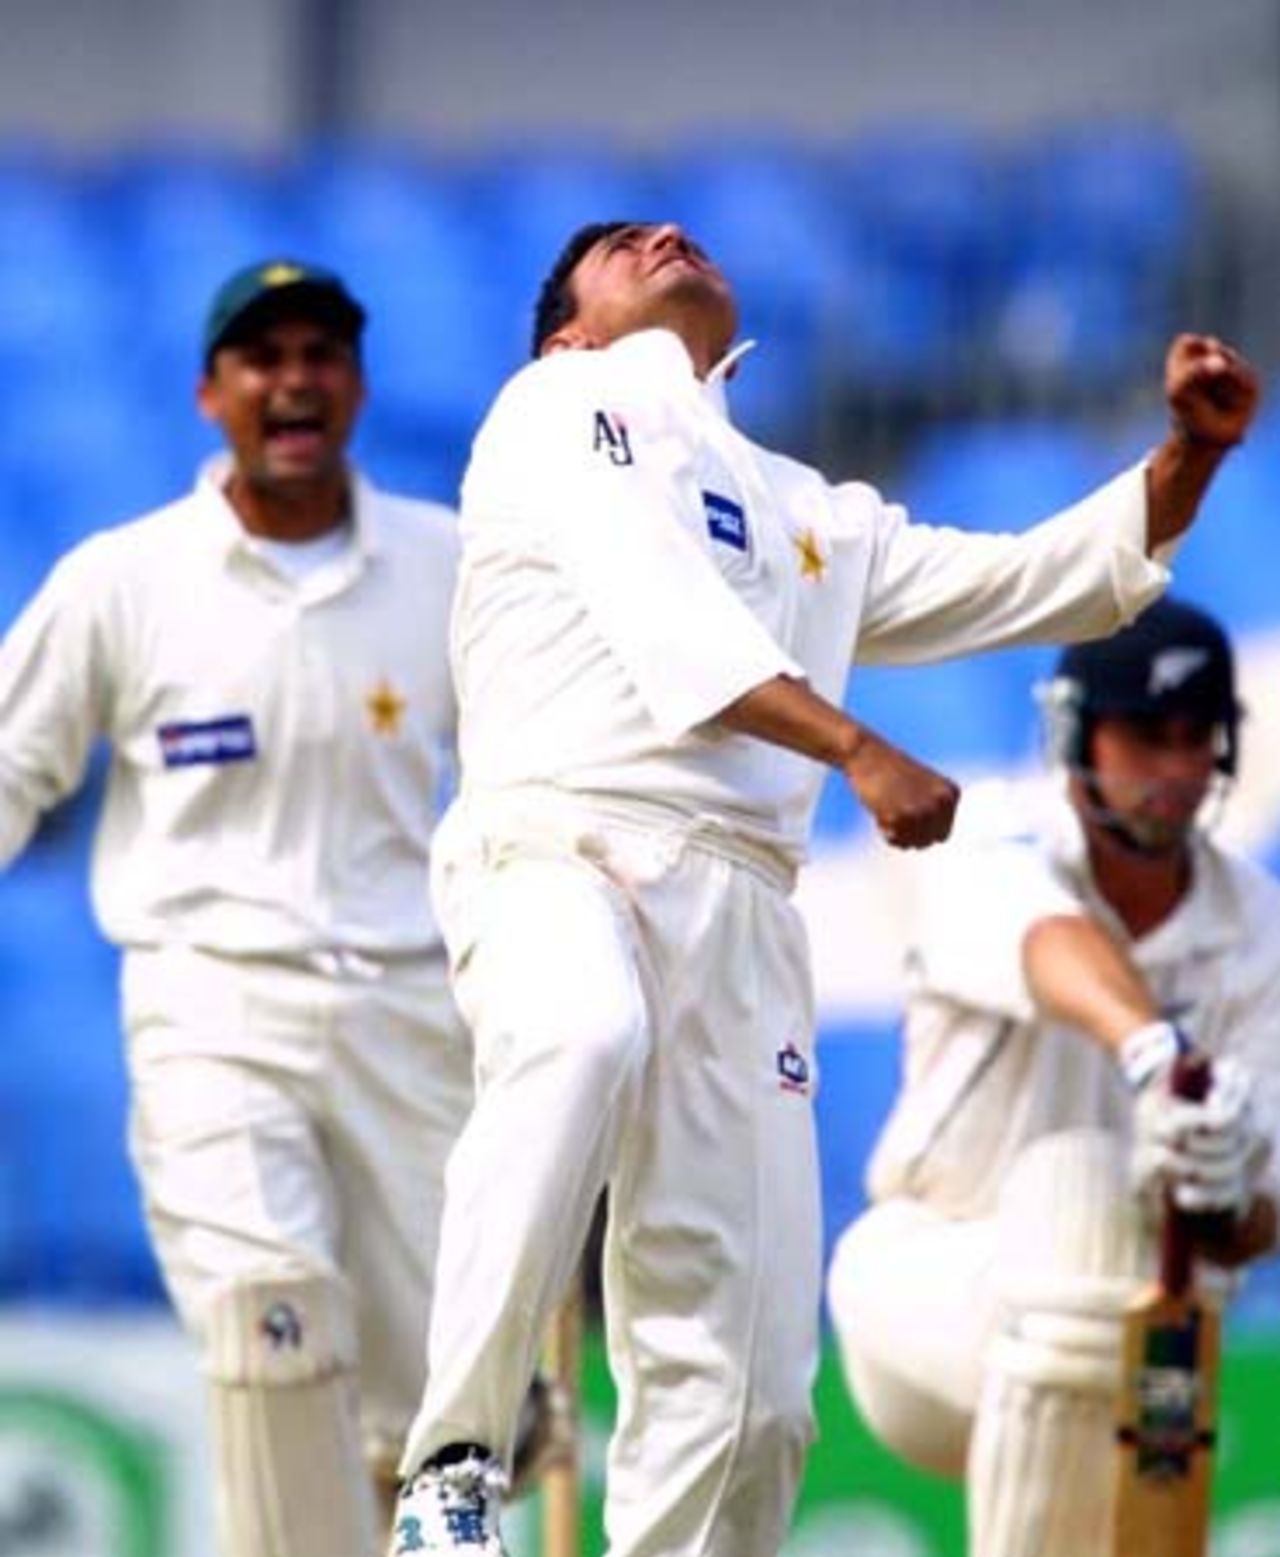 Pakistan off spinner Saqlain Mushtaq (centre) celebrates the dismissal of New Zealand batsman Stephen Fleming (right), leg before wicket for five. Wicket-keeper Moin Khan approaches down the wicket to join the celebration. Saqlain took 4-24 from 25.4 overs in New Zealand's second innings to help complete a 299-run victory. 1st Test: New Zealand v Pakistan at Eden Park, Auckland, 8-12 March 2001 (12 March 2001).